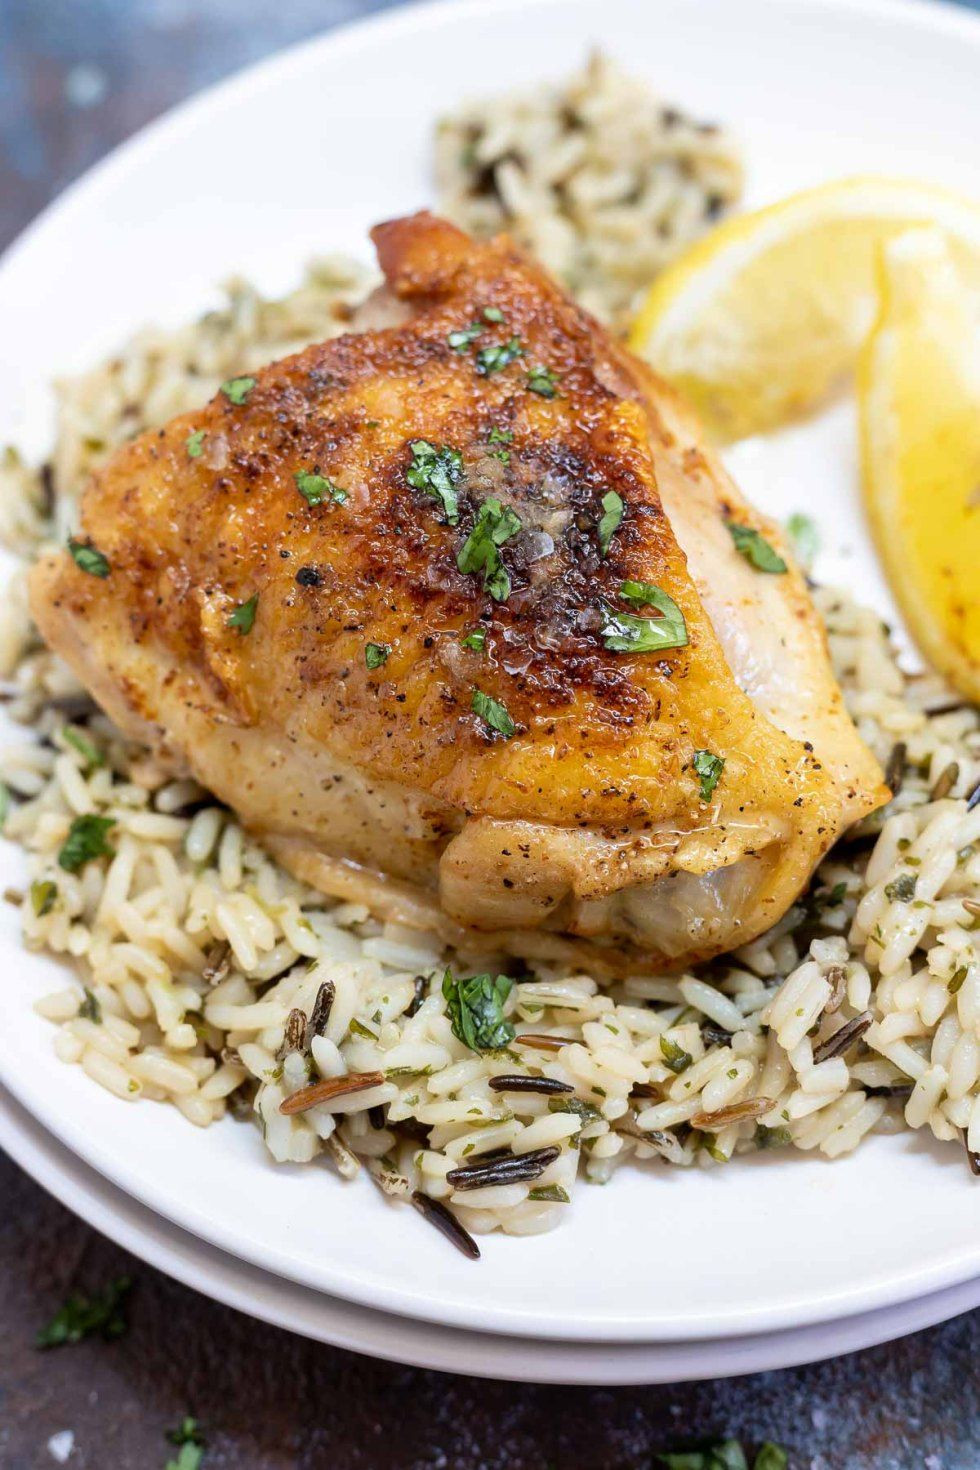 Bone In Chicken Recipes For Dinner
 These Easy Baked Bone In Chicken Thighs are great for a